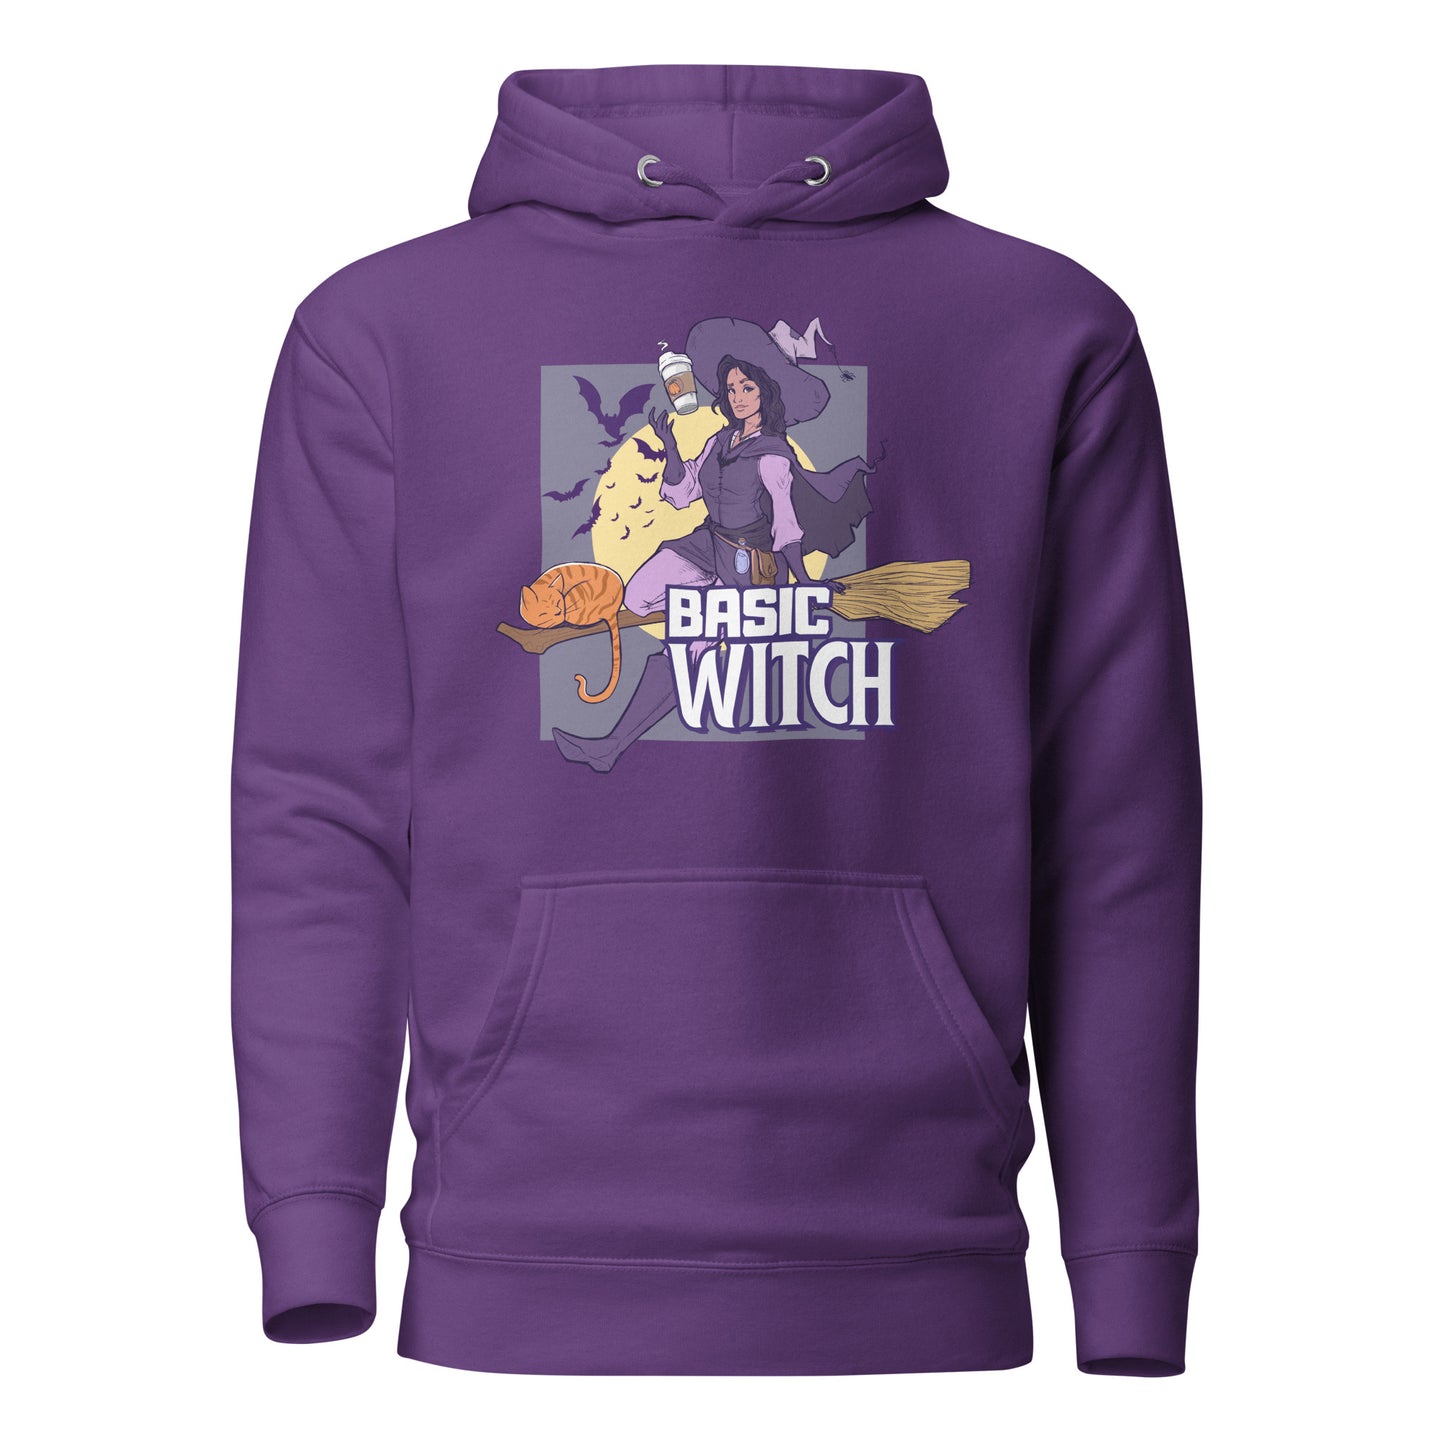 Basic Witch Unisex Hoodie  Level 1 Gamers Purple S 